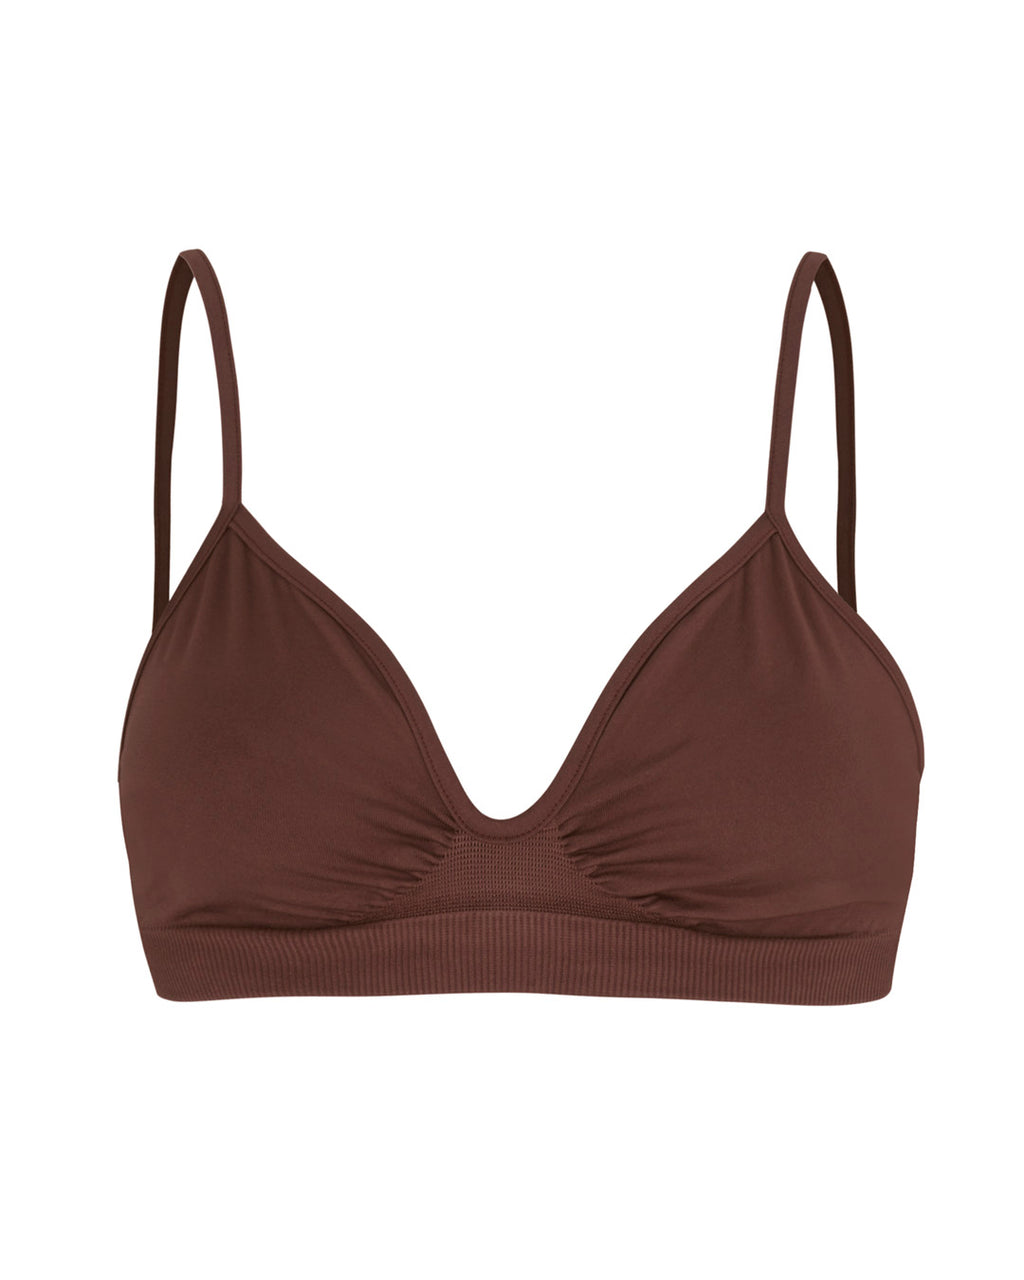 LIBERATED Maroon Top  Supportive Bralette for Bigger Breasts